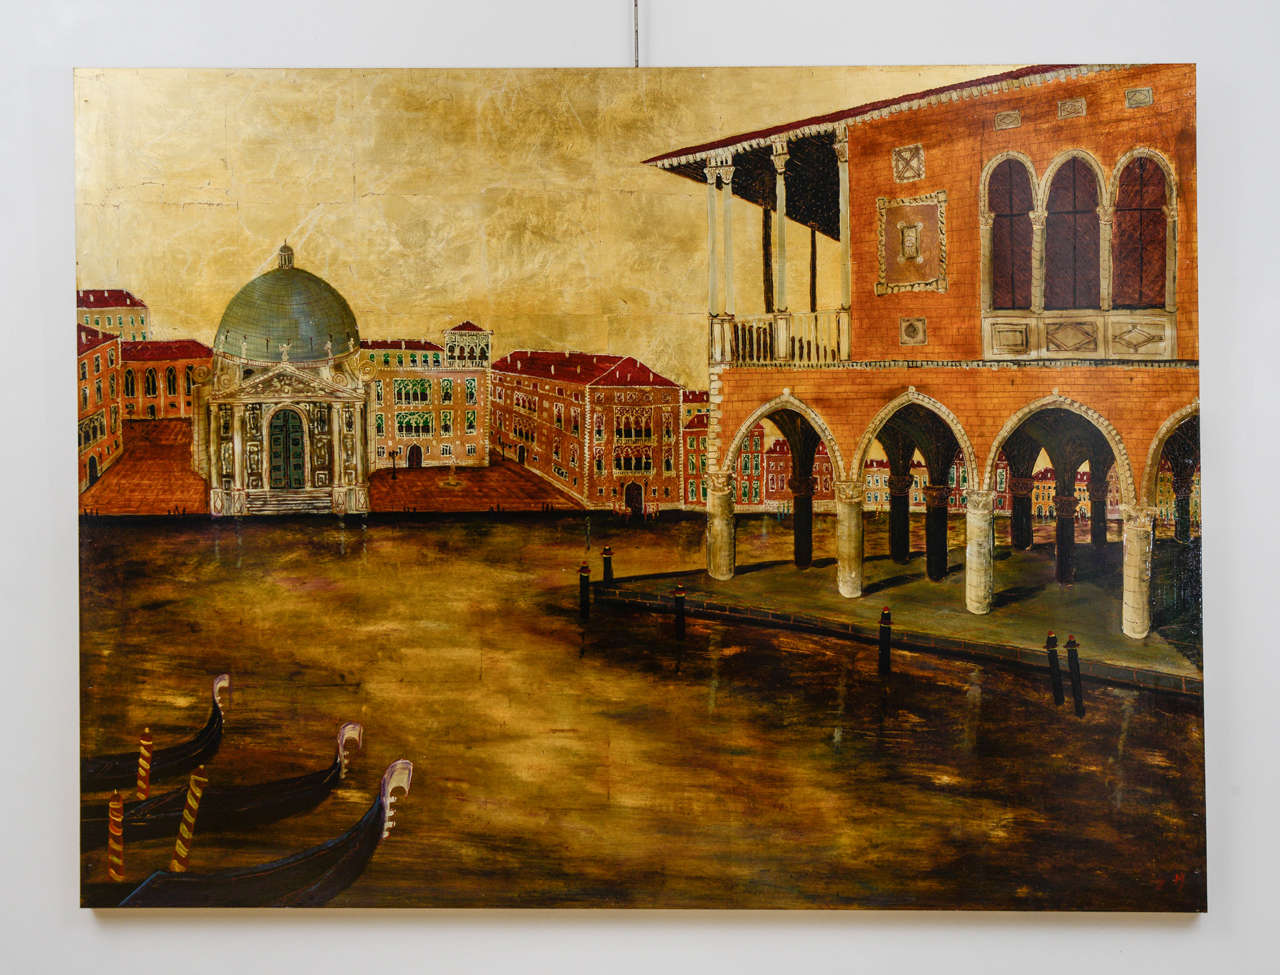 Magnificent lacquer by C. Moreau, 2010,
Venise.
A second painting is matching.